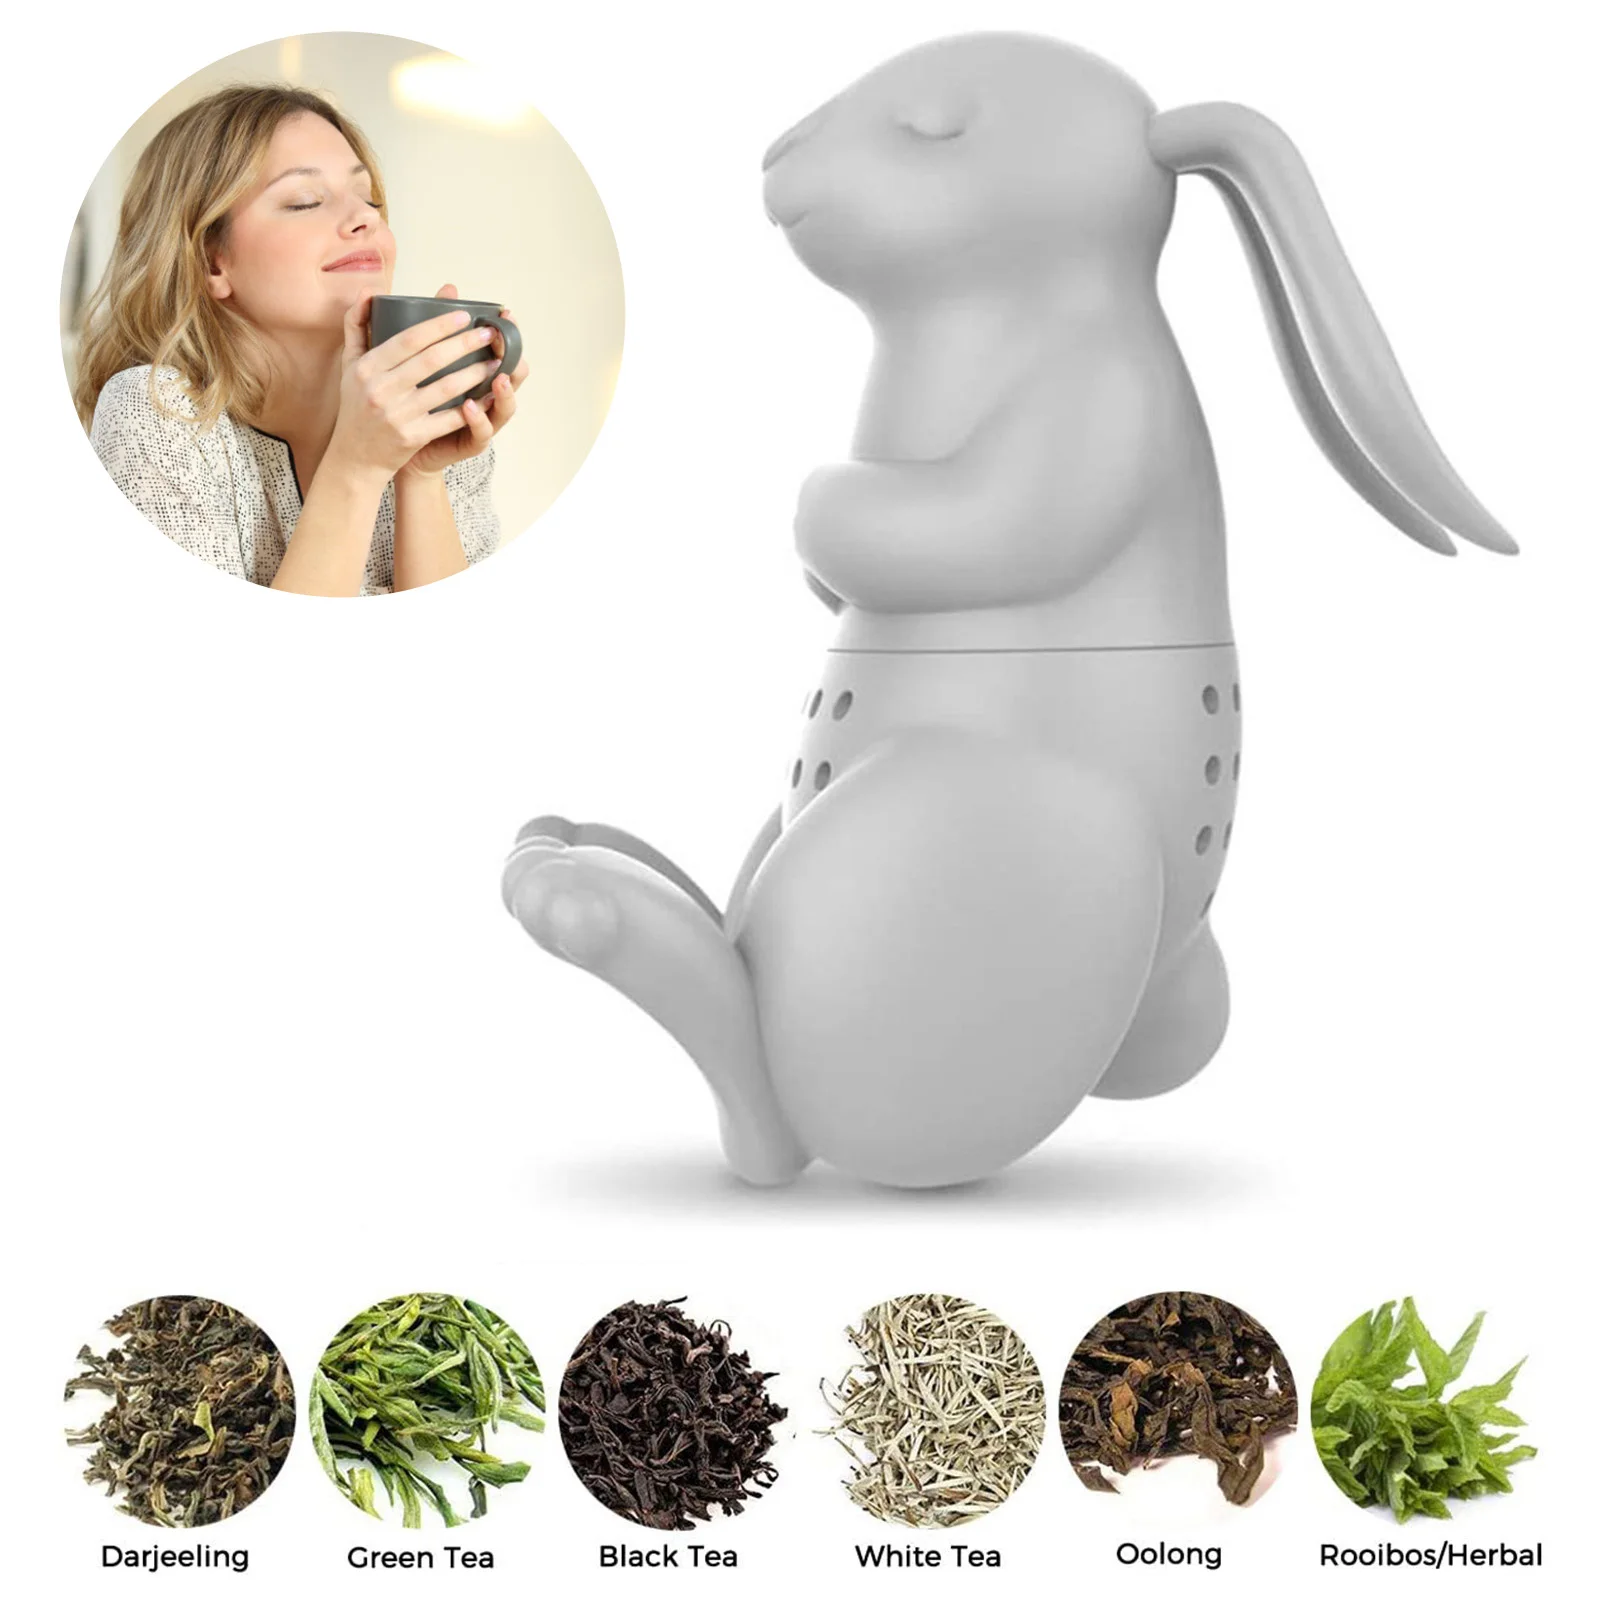 Silicone Tea Strainer Interesting Life Partner Cute Rabbit Teapot Filter Strainer Silicone Tea Maker Bunny Tea Infuser Feasible images - 6